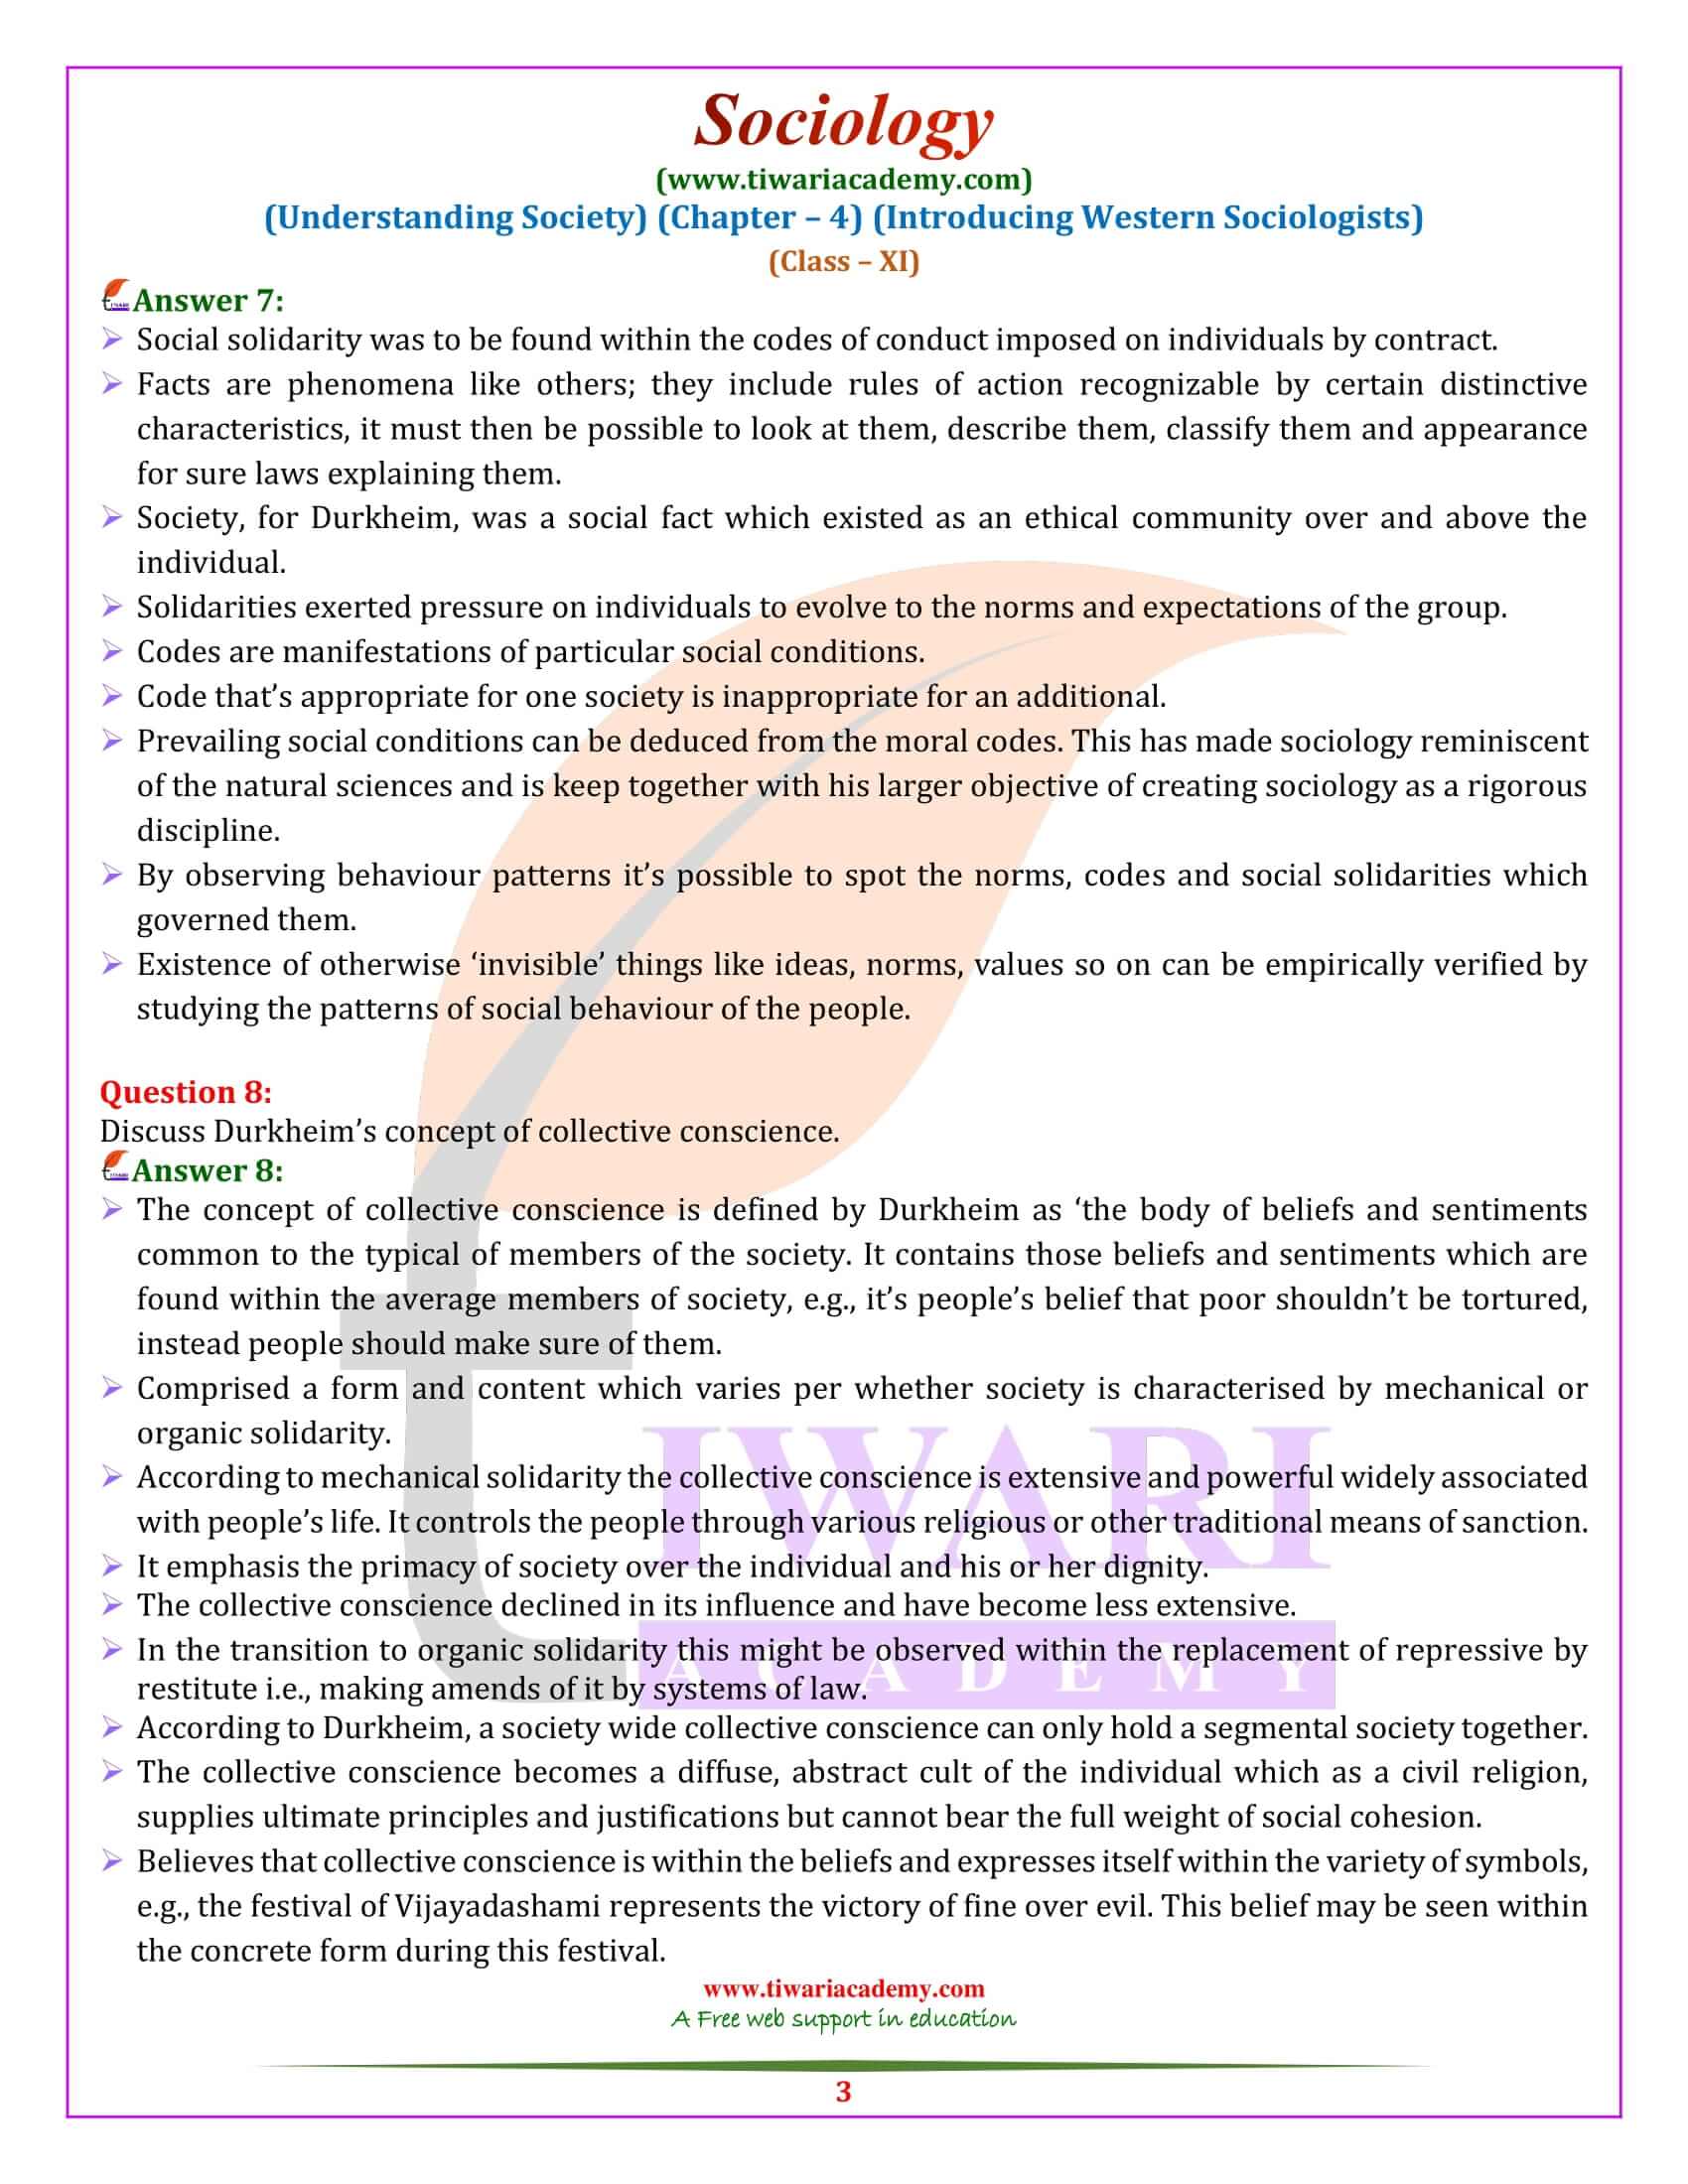 NCERT Solutions for Class 11 Sociology Chapter 4 Answers in English Medium